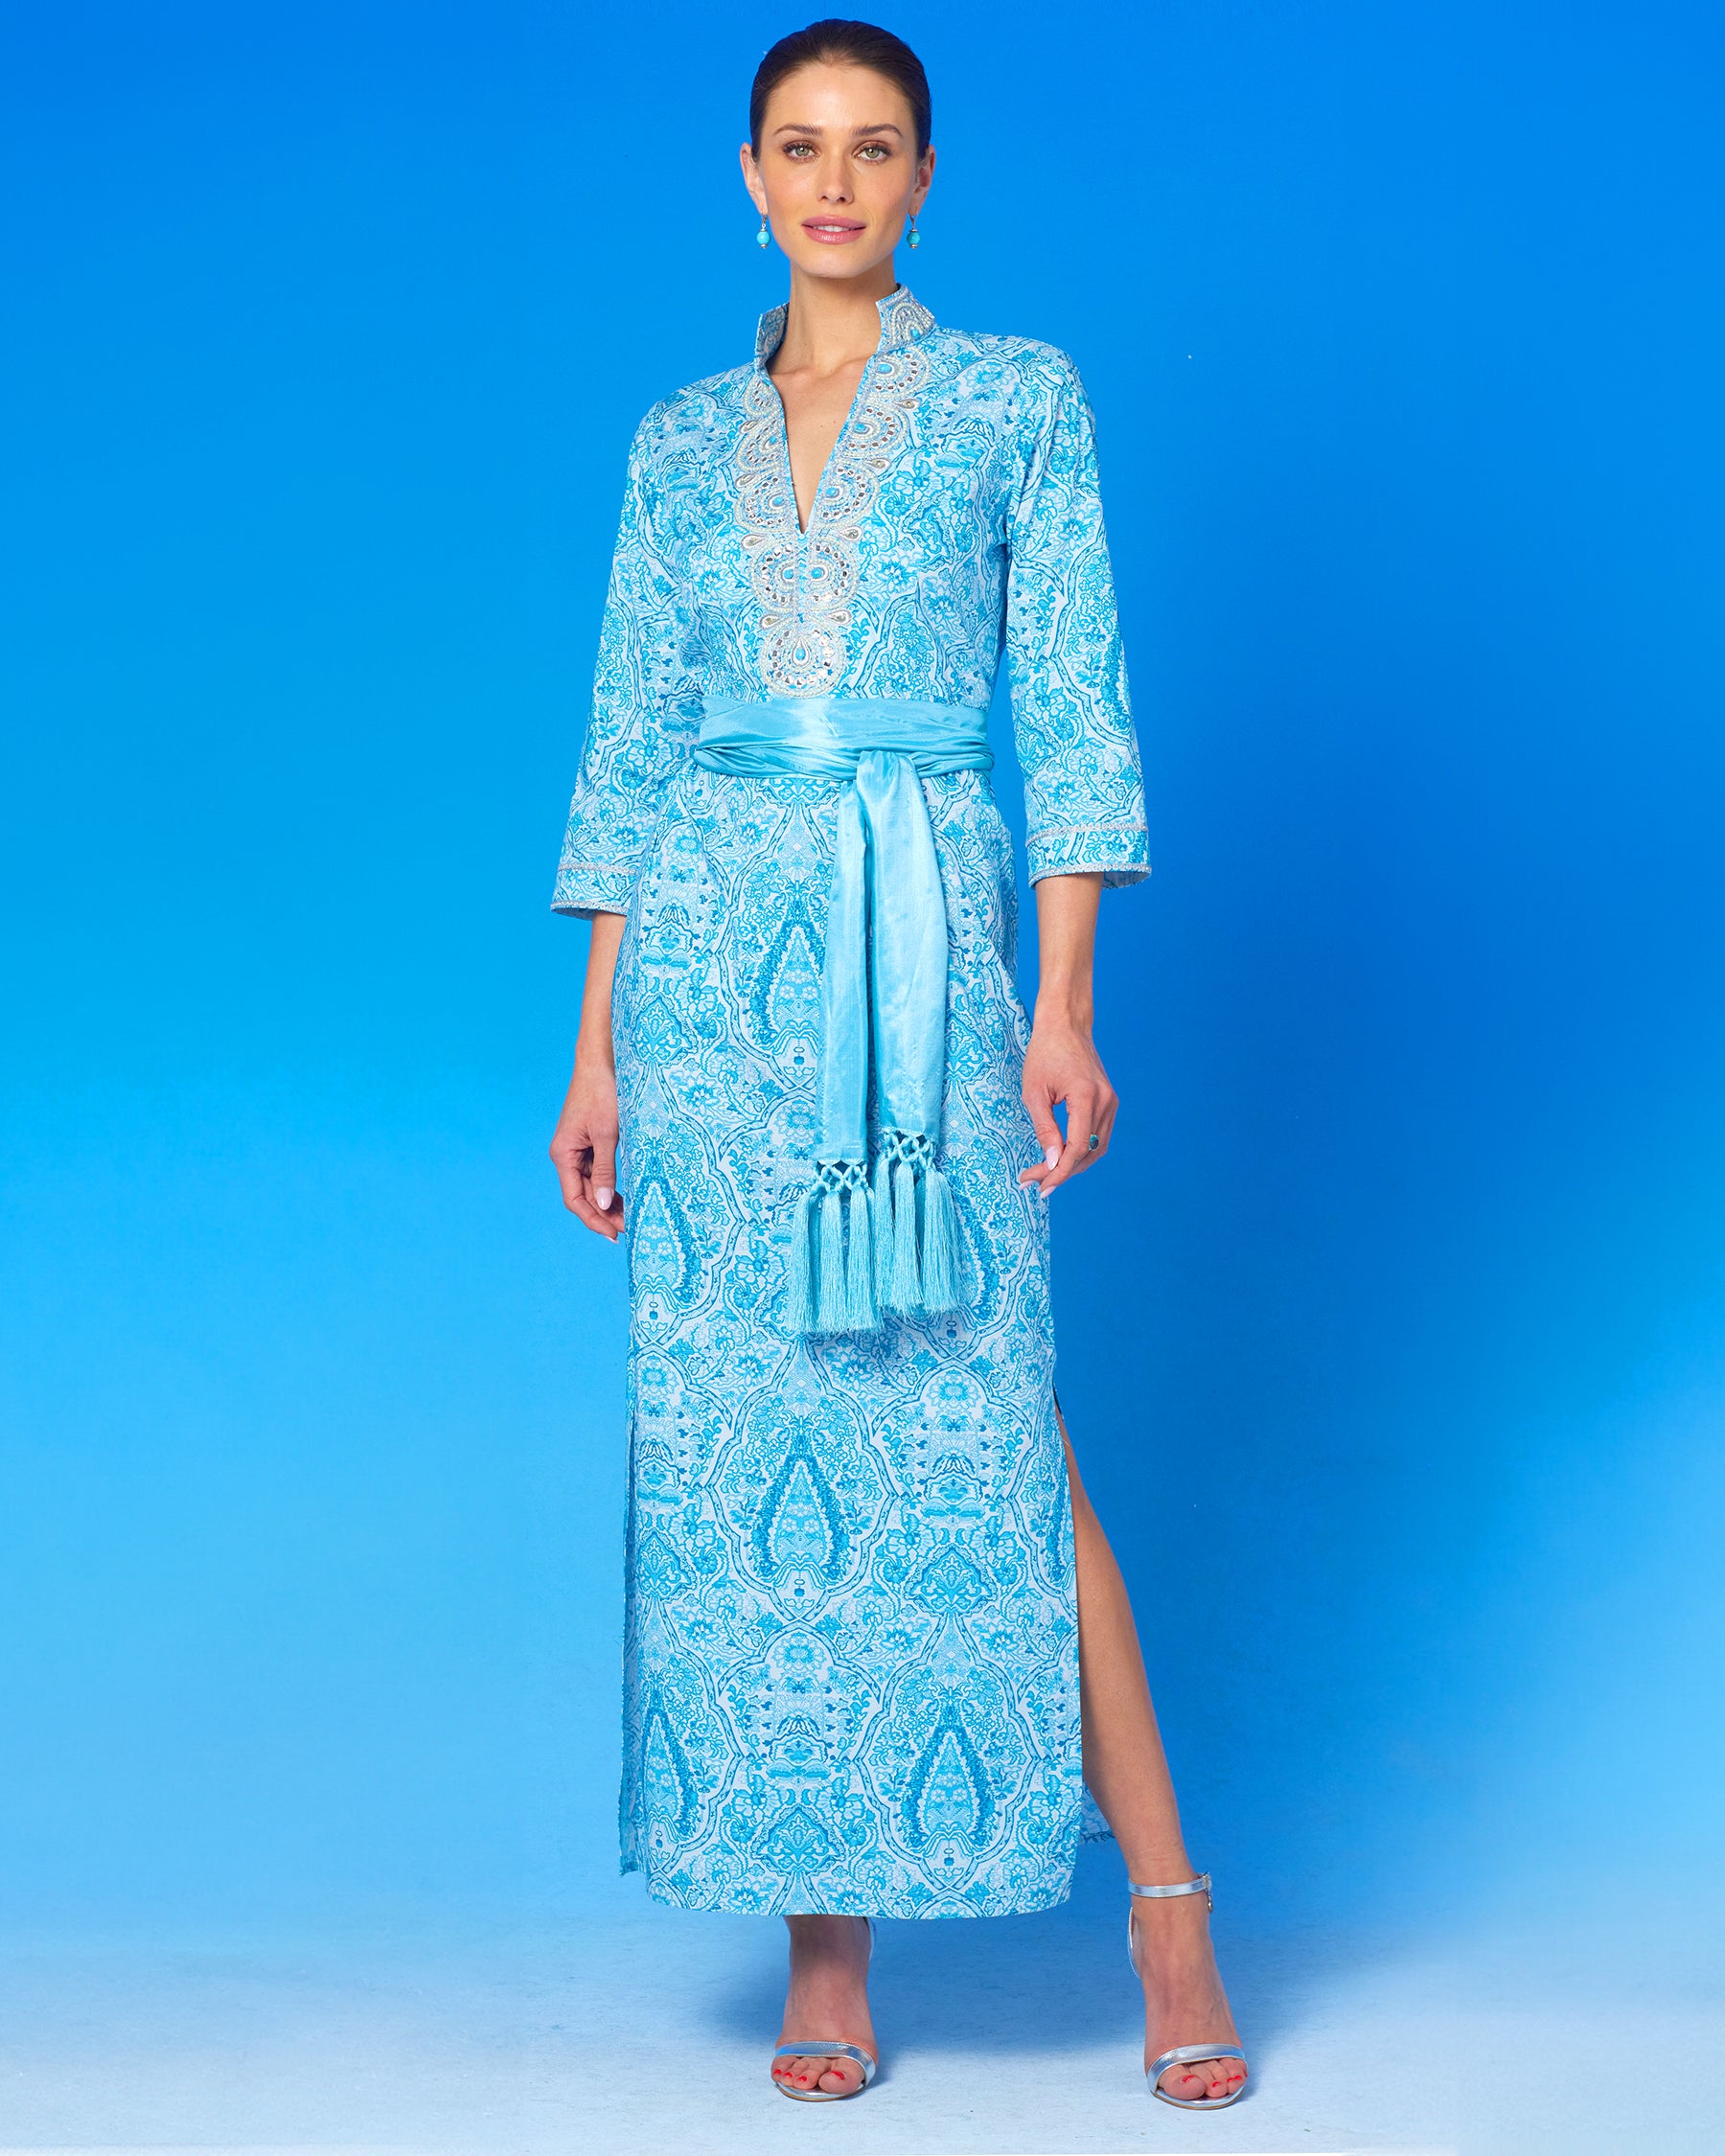 Cosima Sash Belt in Bermuda Turquoise worn with the Noor Long Tunic Dress in Turquoise Paisley and Silver Embellishment